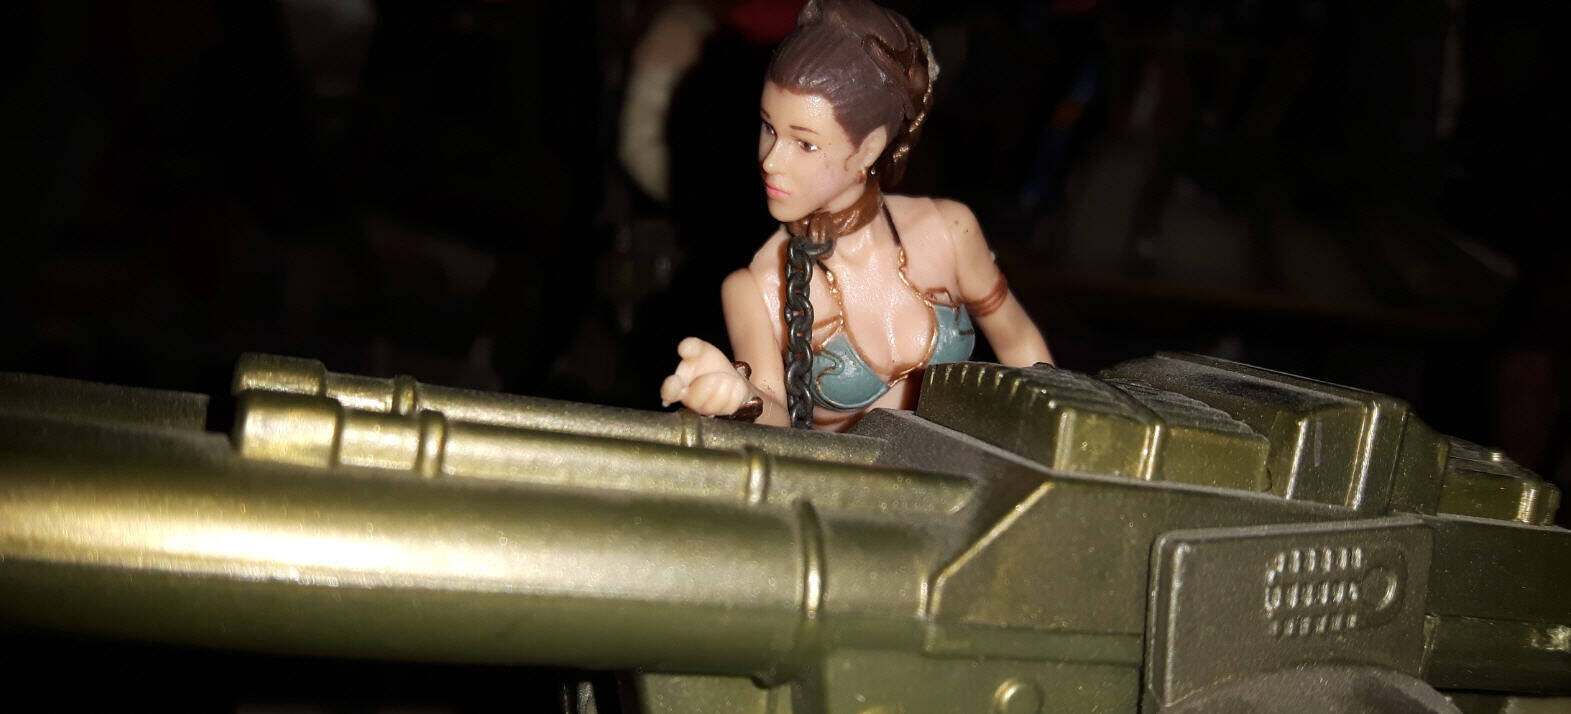 Princess Leia Organa Figure With Jabba's Sail Barge Cannon Power of the Jedi